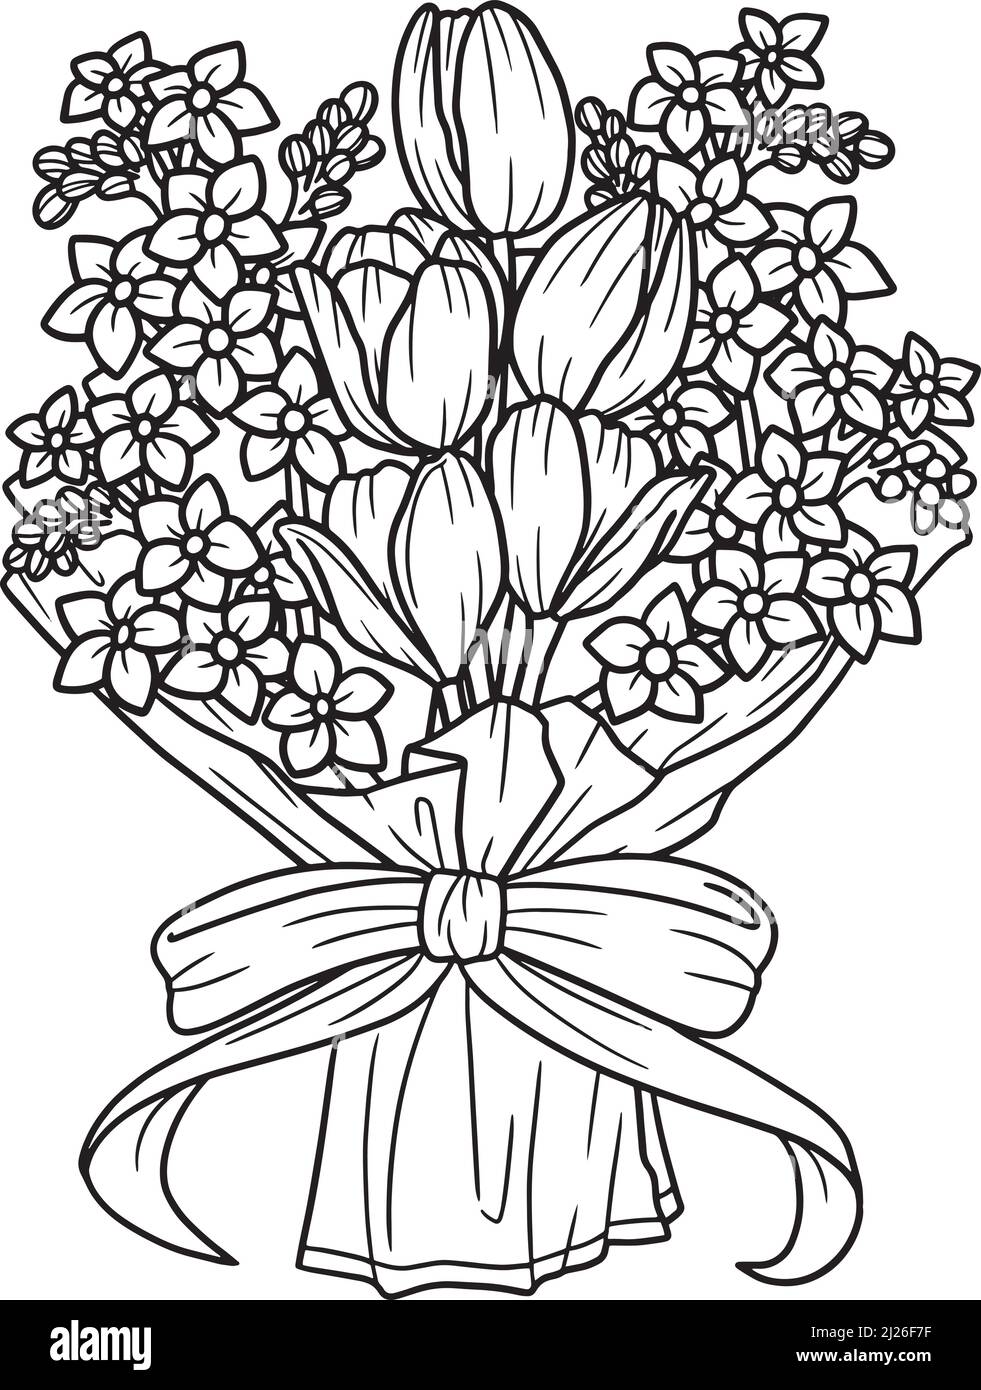 Flower Bouquet Coloring Page for Adults Stock Vector Image & Art ...